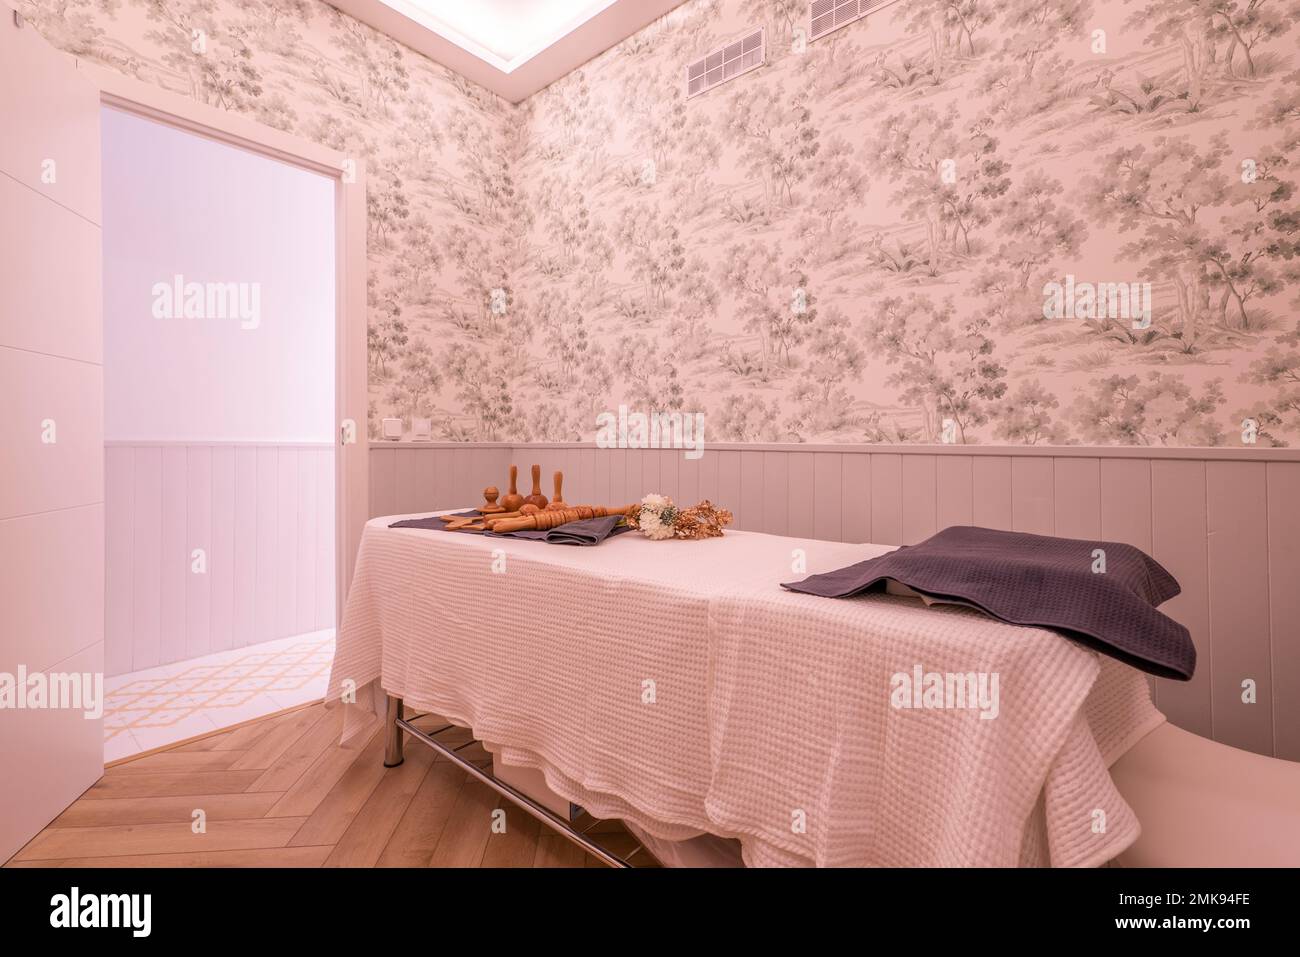 Cabin with massage table with towels and wood therapy utensils and treatments from a beauty salon and aesthetic care Stock Photo